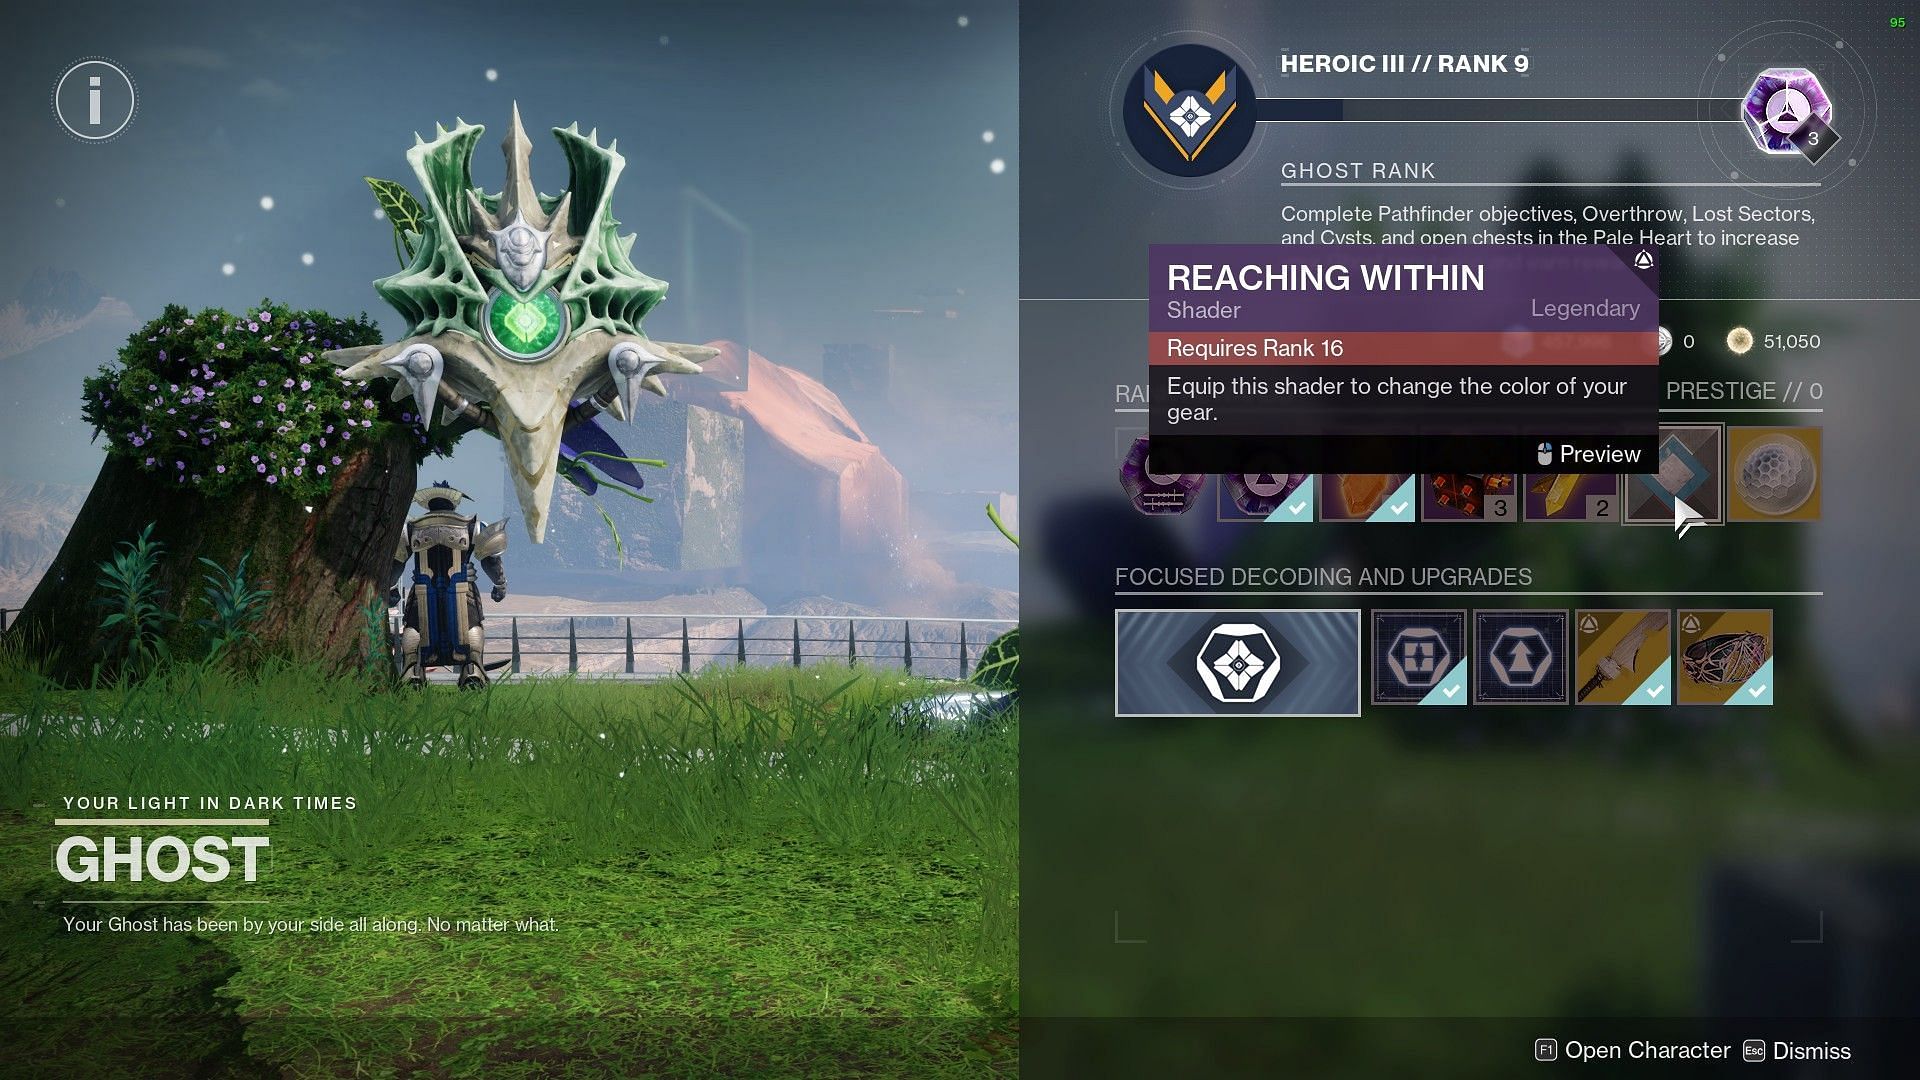 Ghost reputation inventory in Destiny 2 (Image via Bungie)